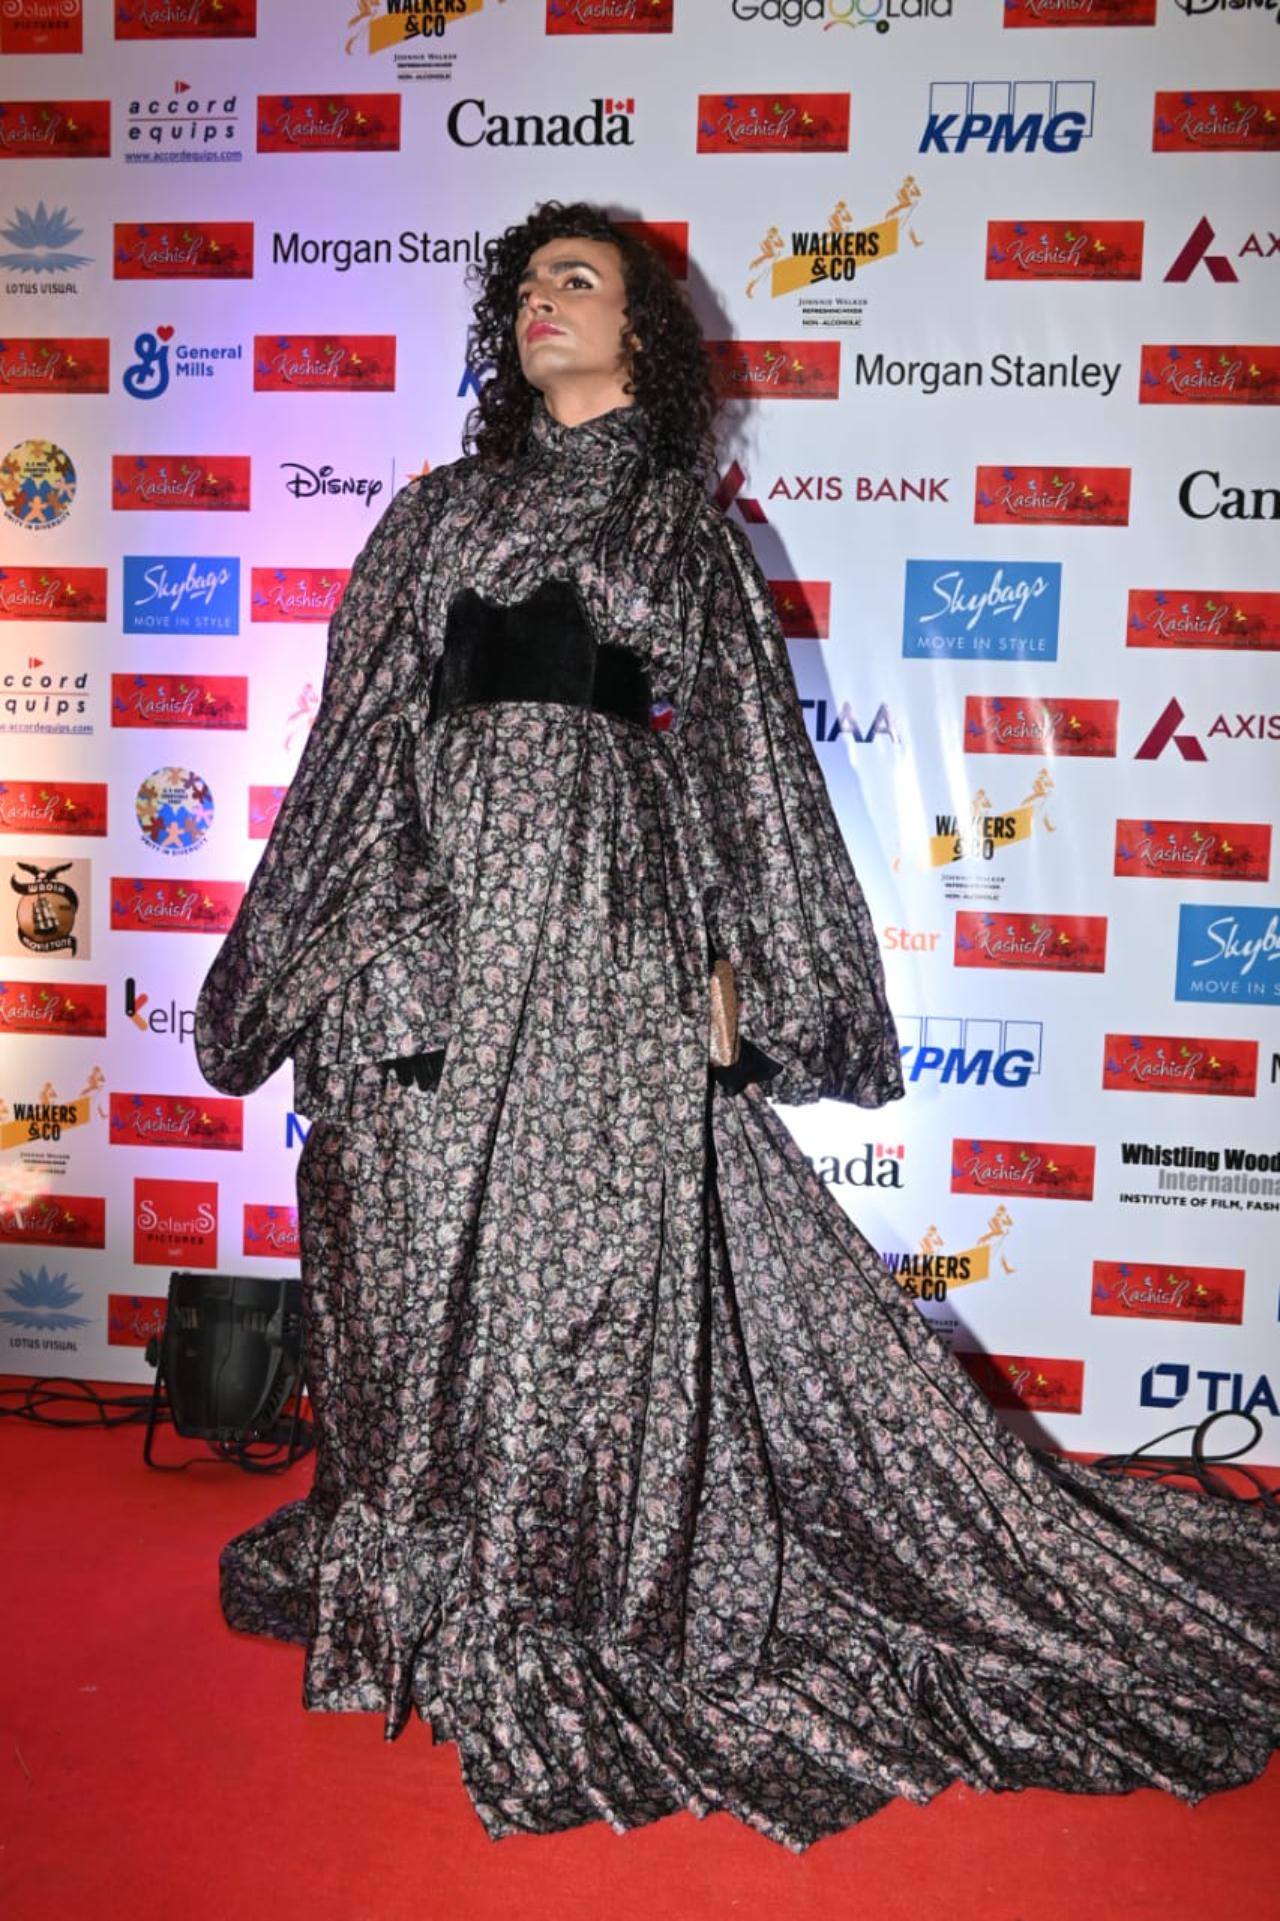 Pooja Solanki who indentifies as non binary is an artist and walked the red carpet in a stellar gown